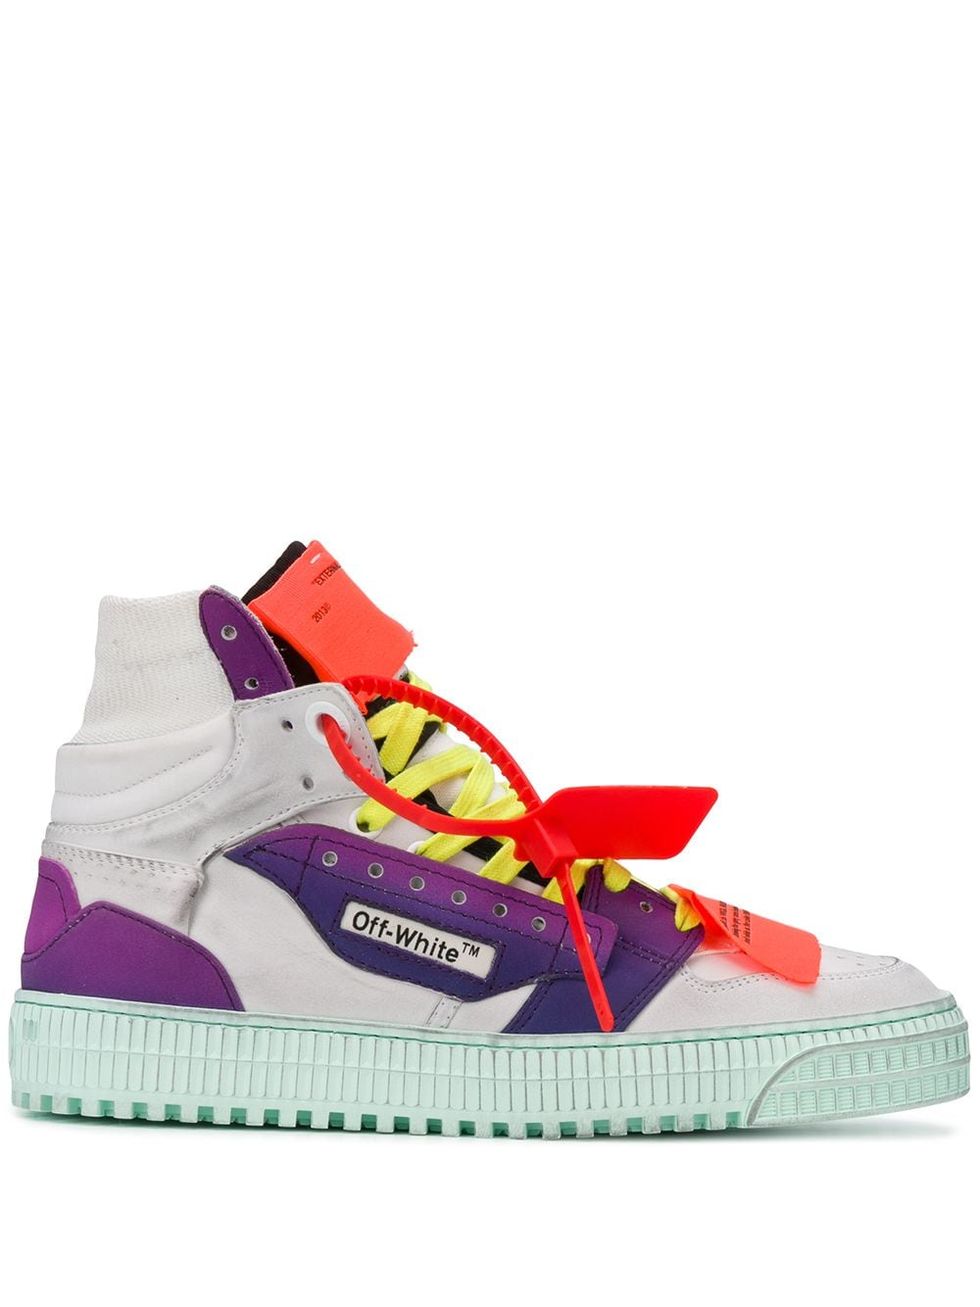 Le sneakers Off-White